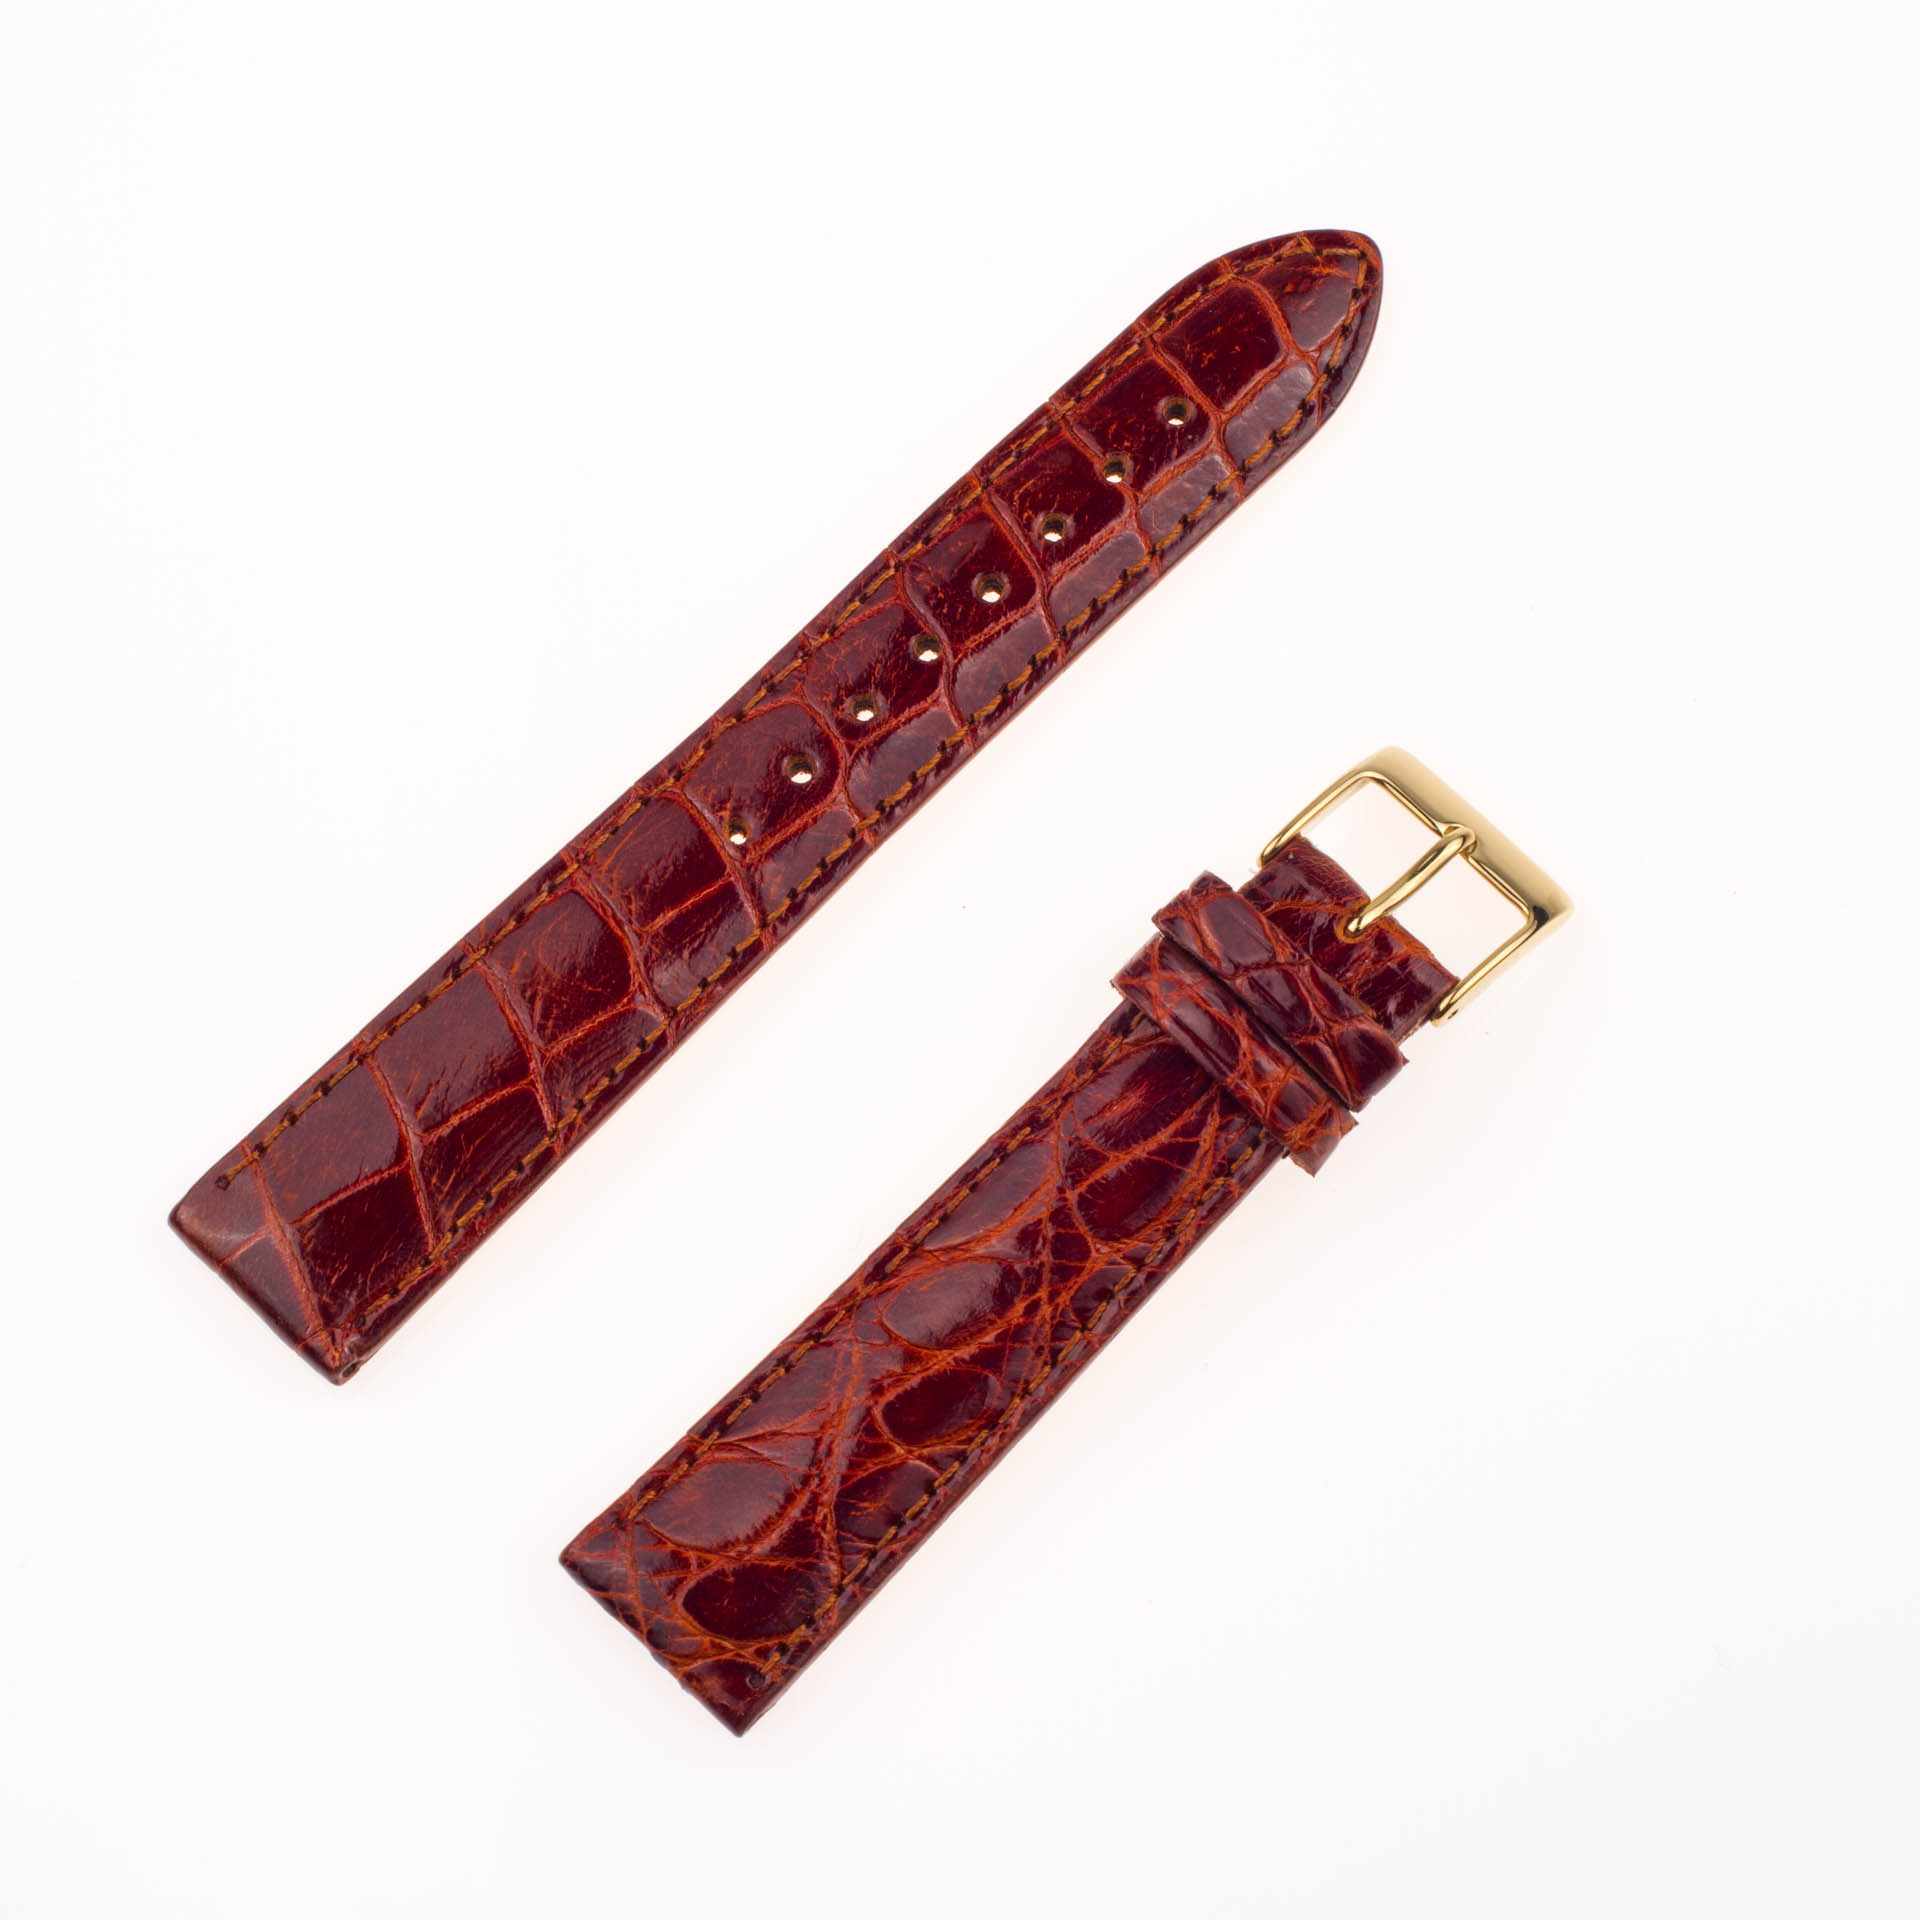 Shiny brown alligator strap (18x16) with tang buckle